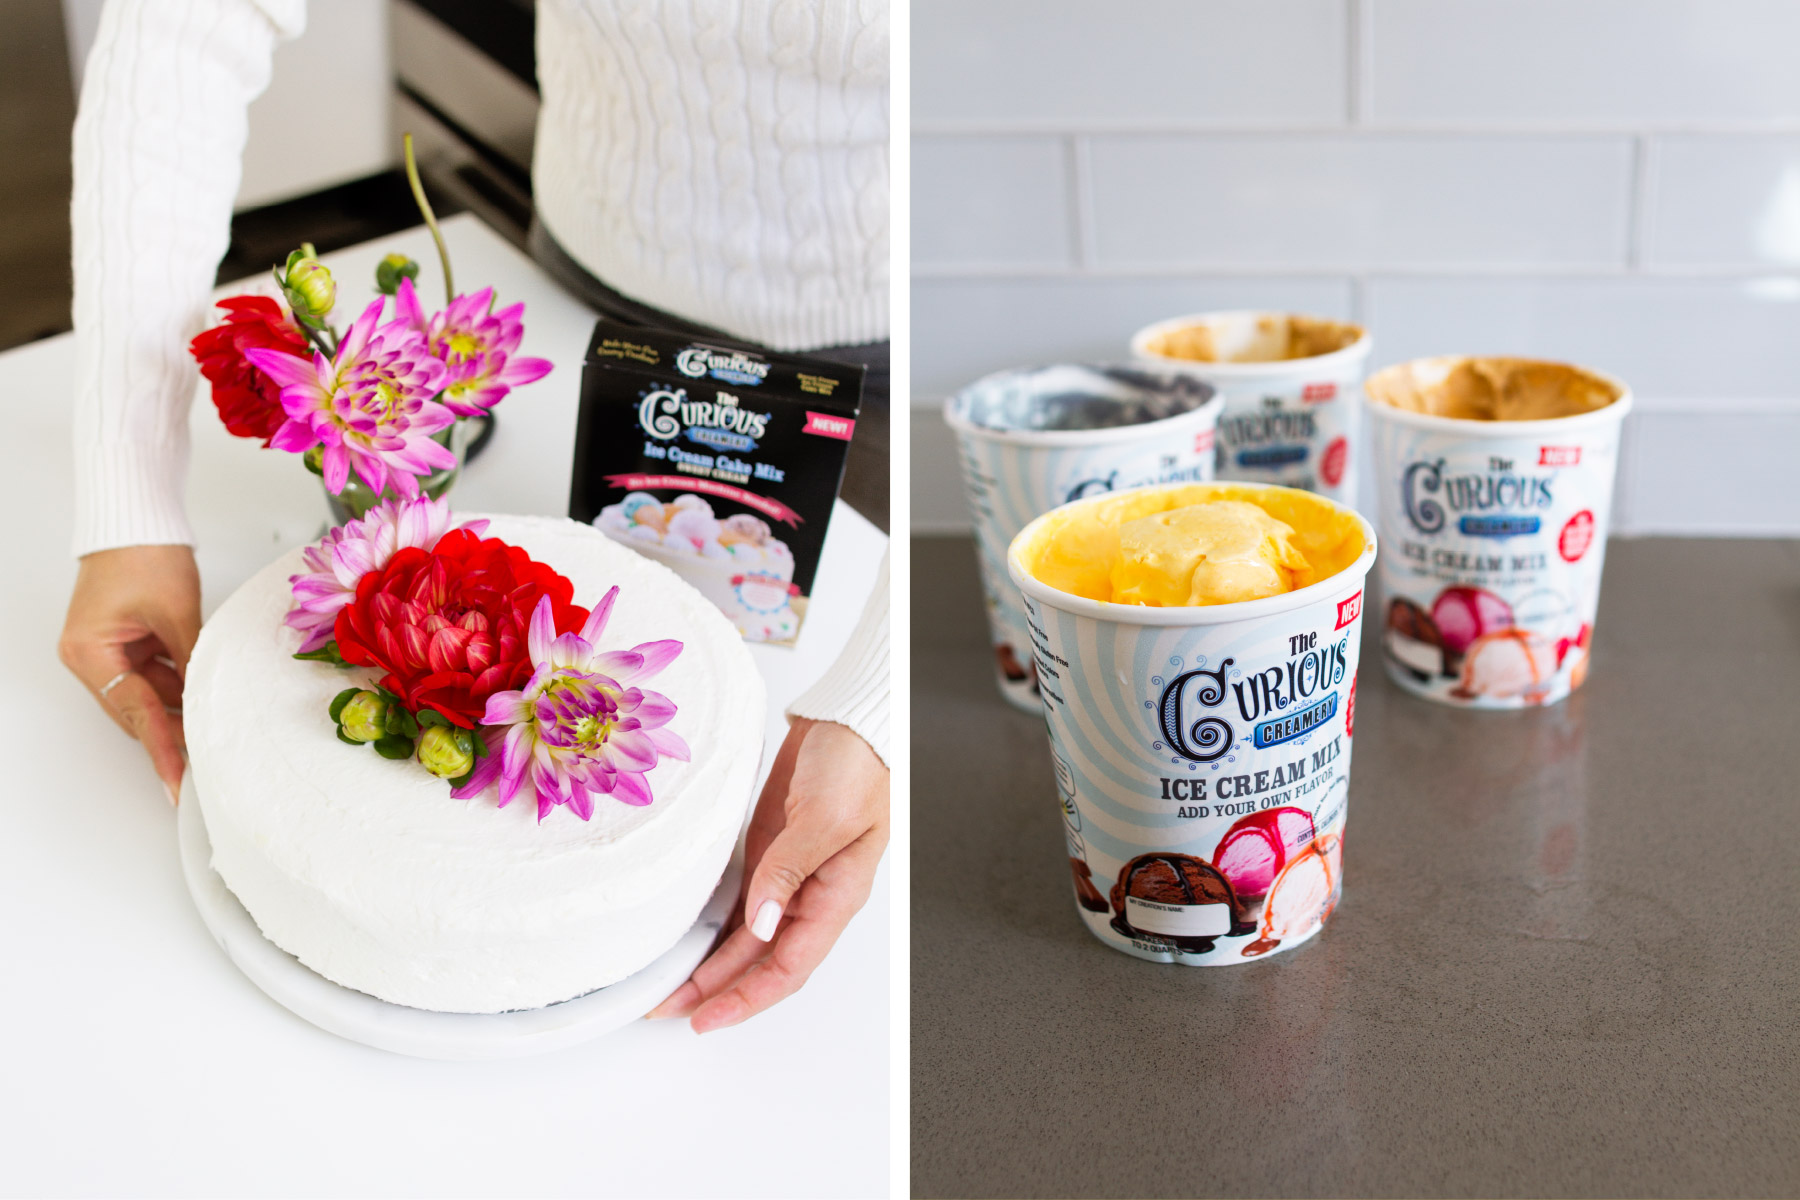 Fuze-Branding-Curious-Creamery-DIY-Ice-Cream-Mix-Flavor-Options-Floral-Cake-Design-Food-Product-Photography-Styling